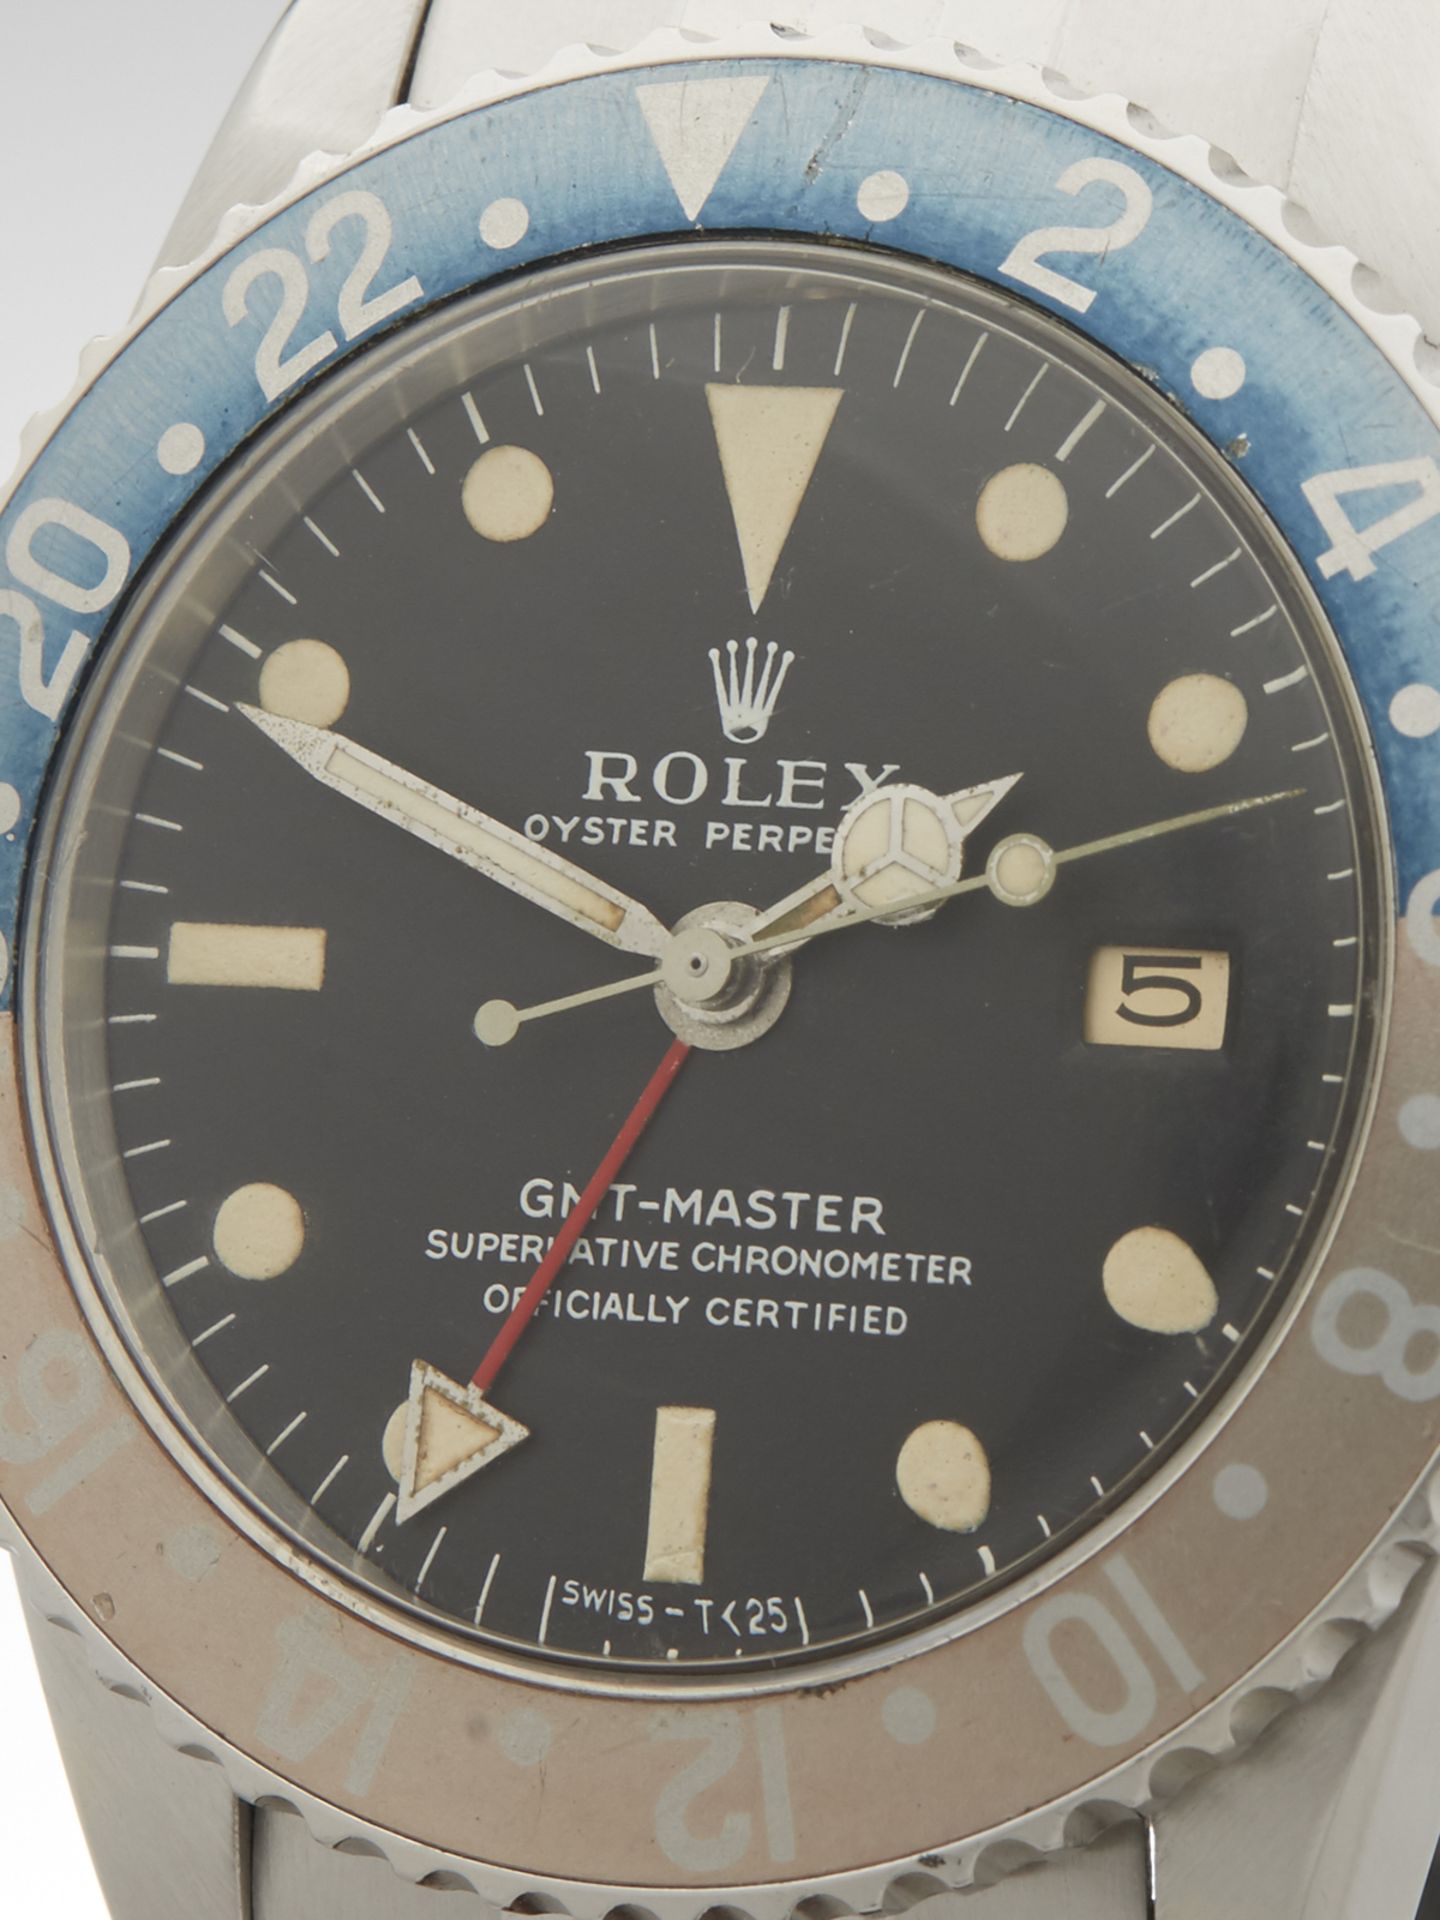 Rare, 1961 Rolex, GMT-Master Pointed Crown Guards, Matt Dial 40mm Stainless Steel 1675 - Image 2 of 9